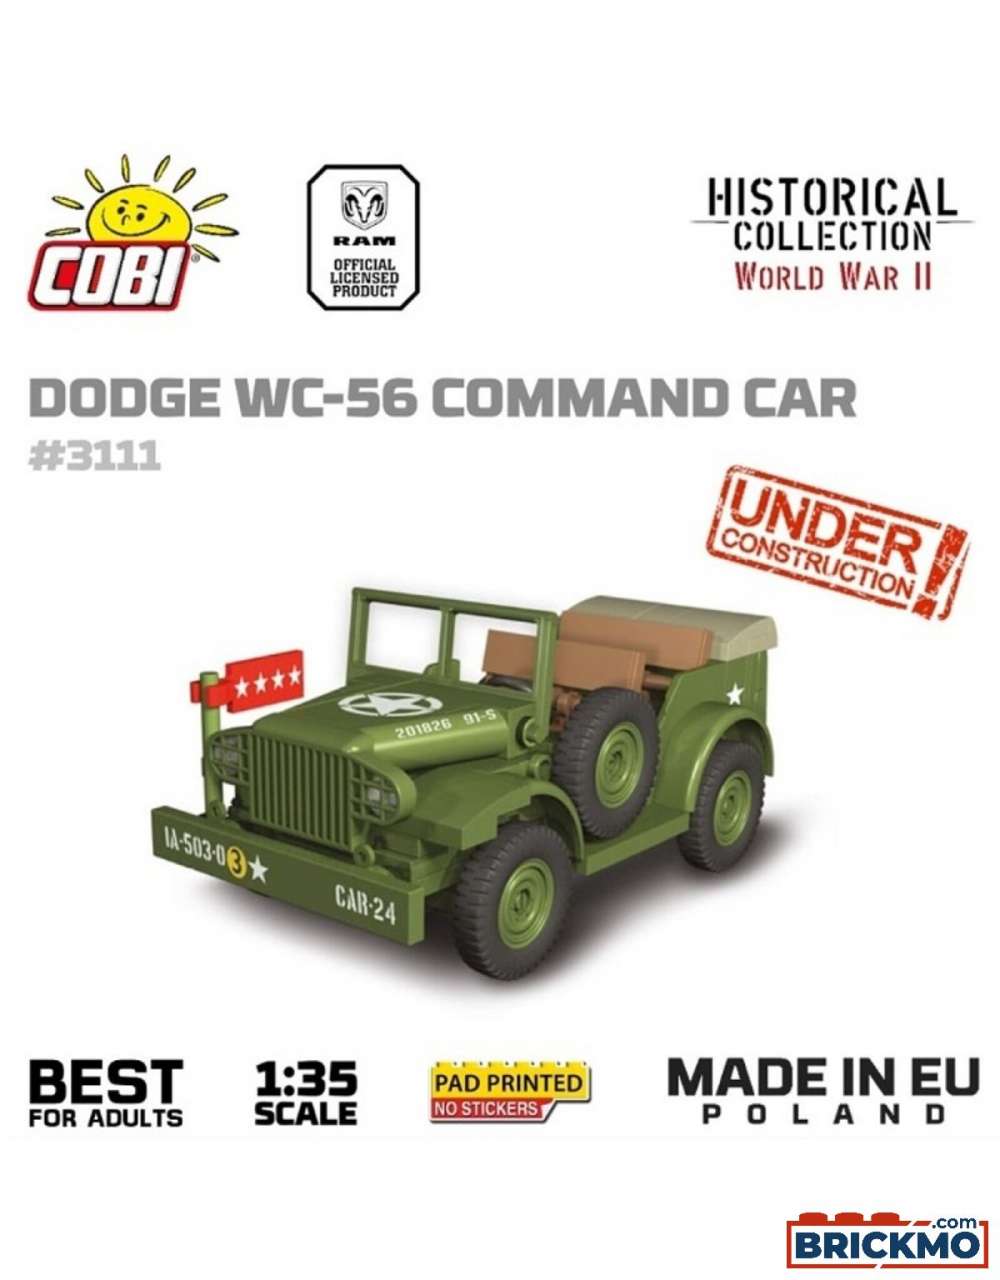 Cobi Historical Collection World War II 3111 Dodge WC-56 Command Car D-Day 3111